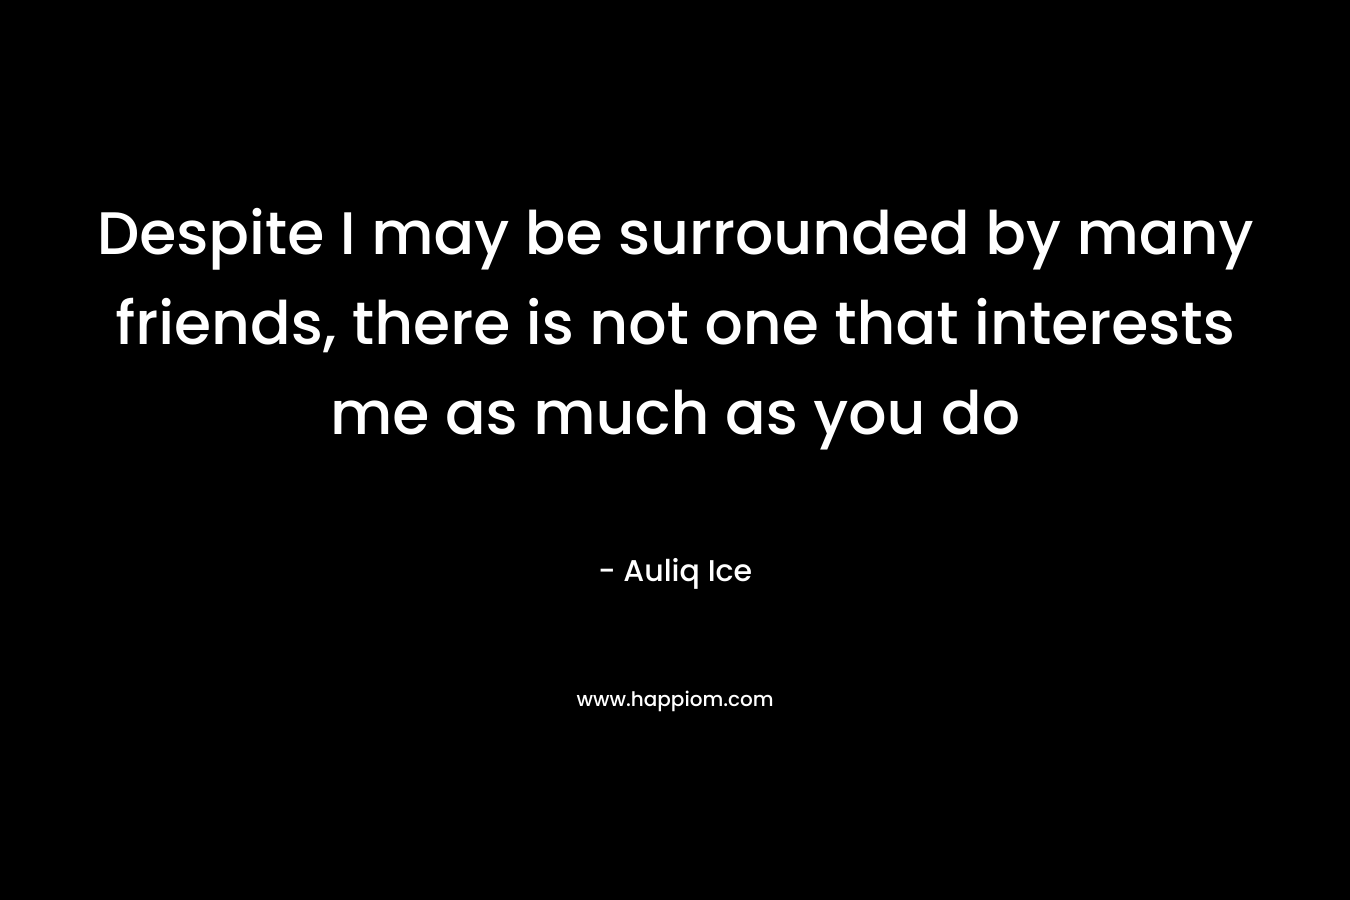 Despite I may be surrounded by many friends, there is not one that interests me as much as you do – Auliq Ice